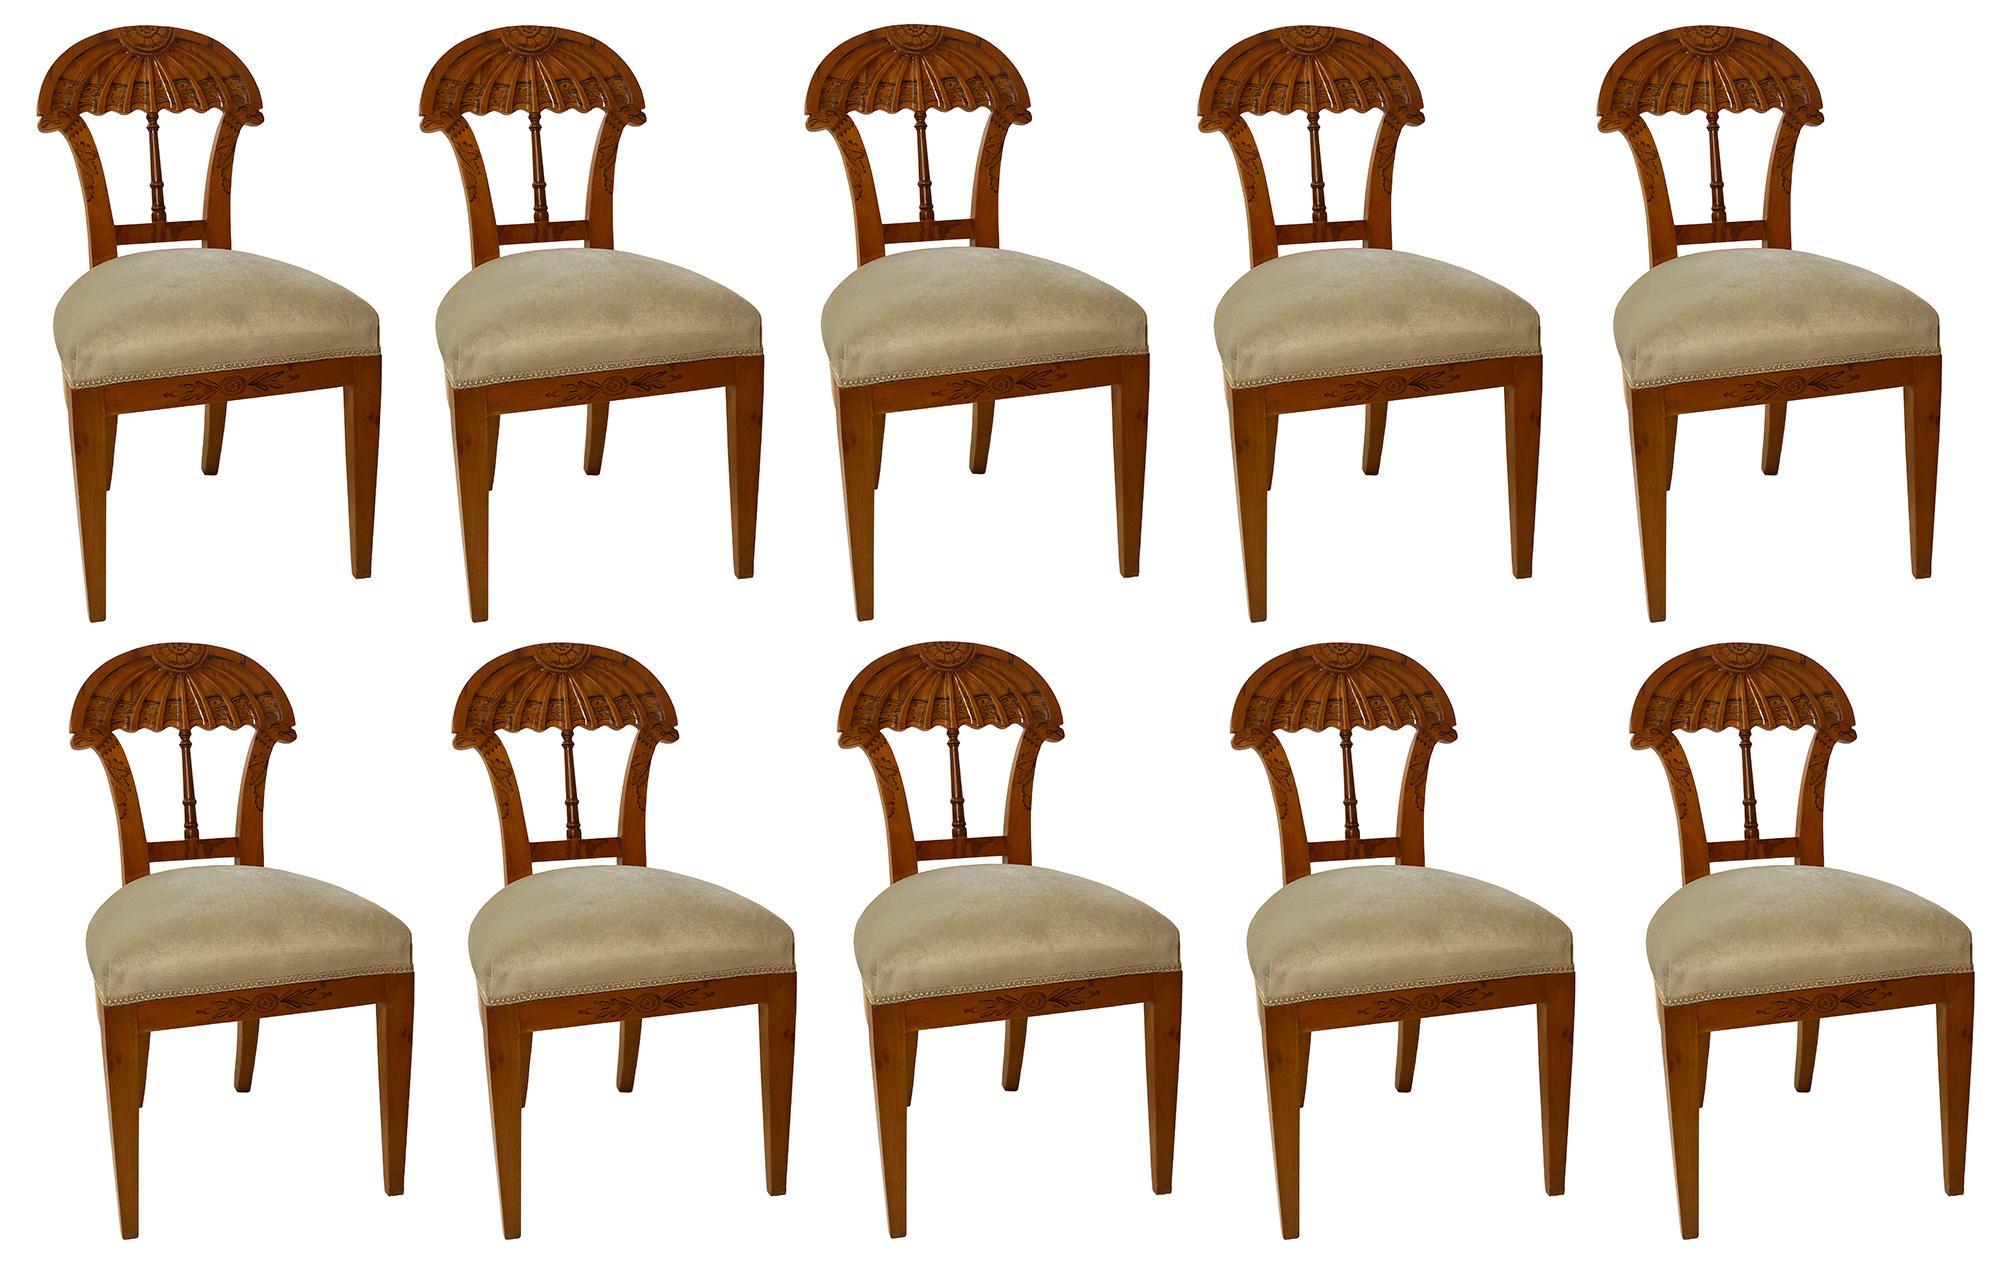 A rare set of 10 Biedermeier fruitwood and penwork dining chairs, the backs the arched fluted area with intricate penwork, above two bird head stands with penwork, supported by a balustrade stretcher, the frieze decorated with additional penwork,